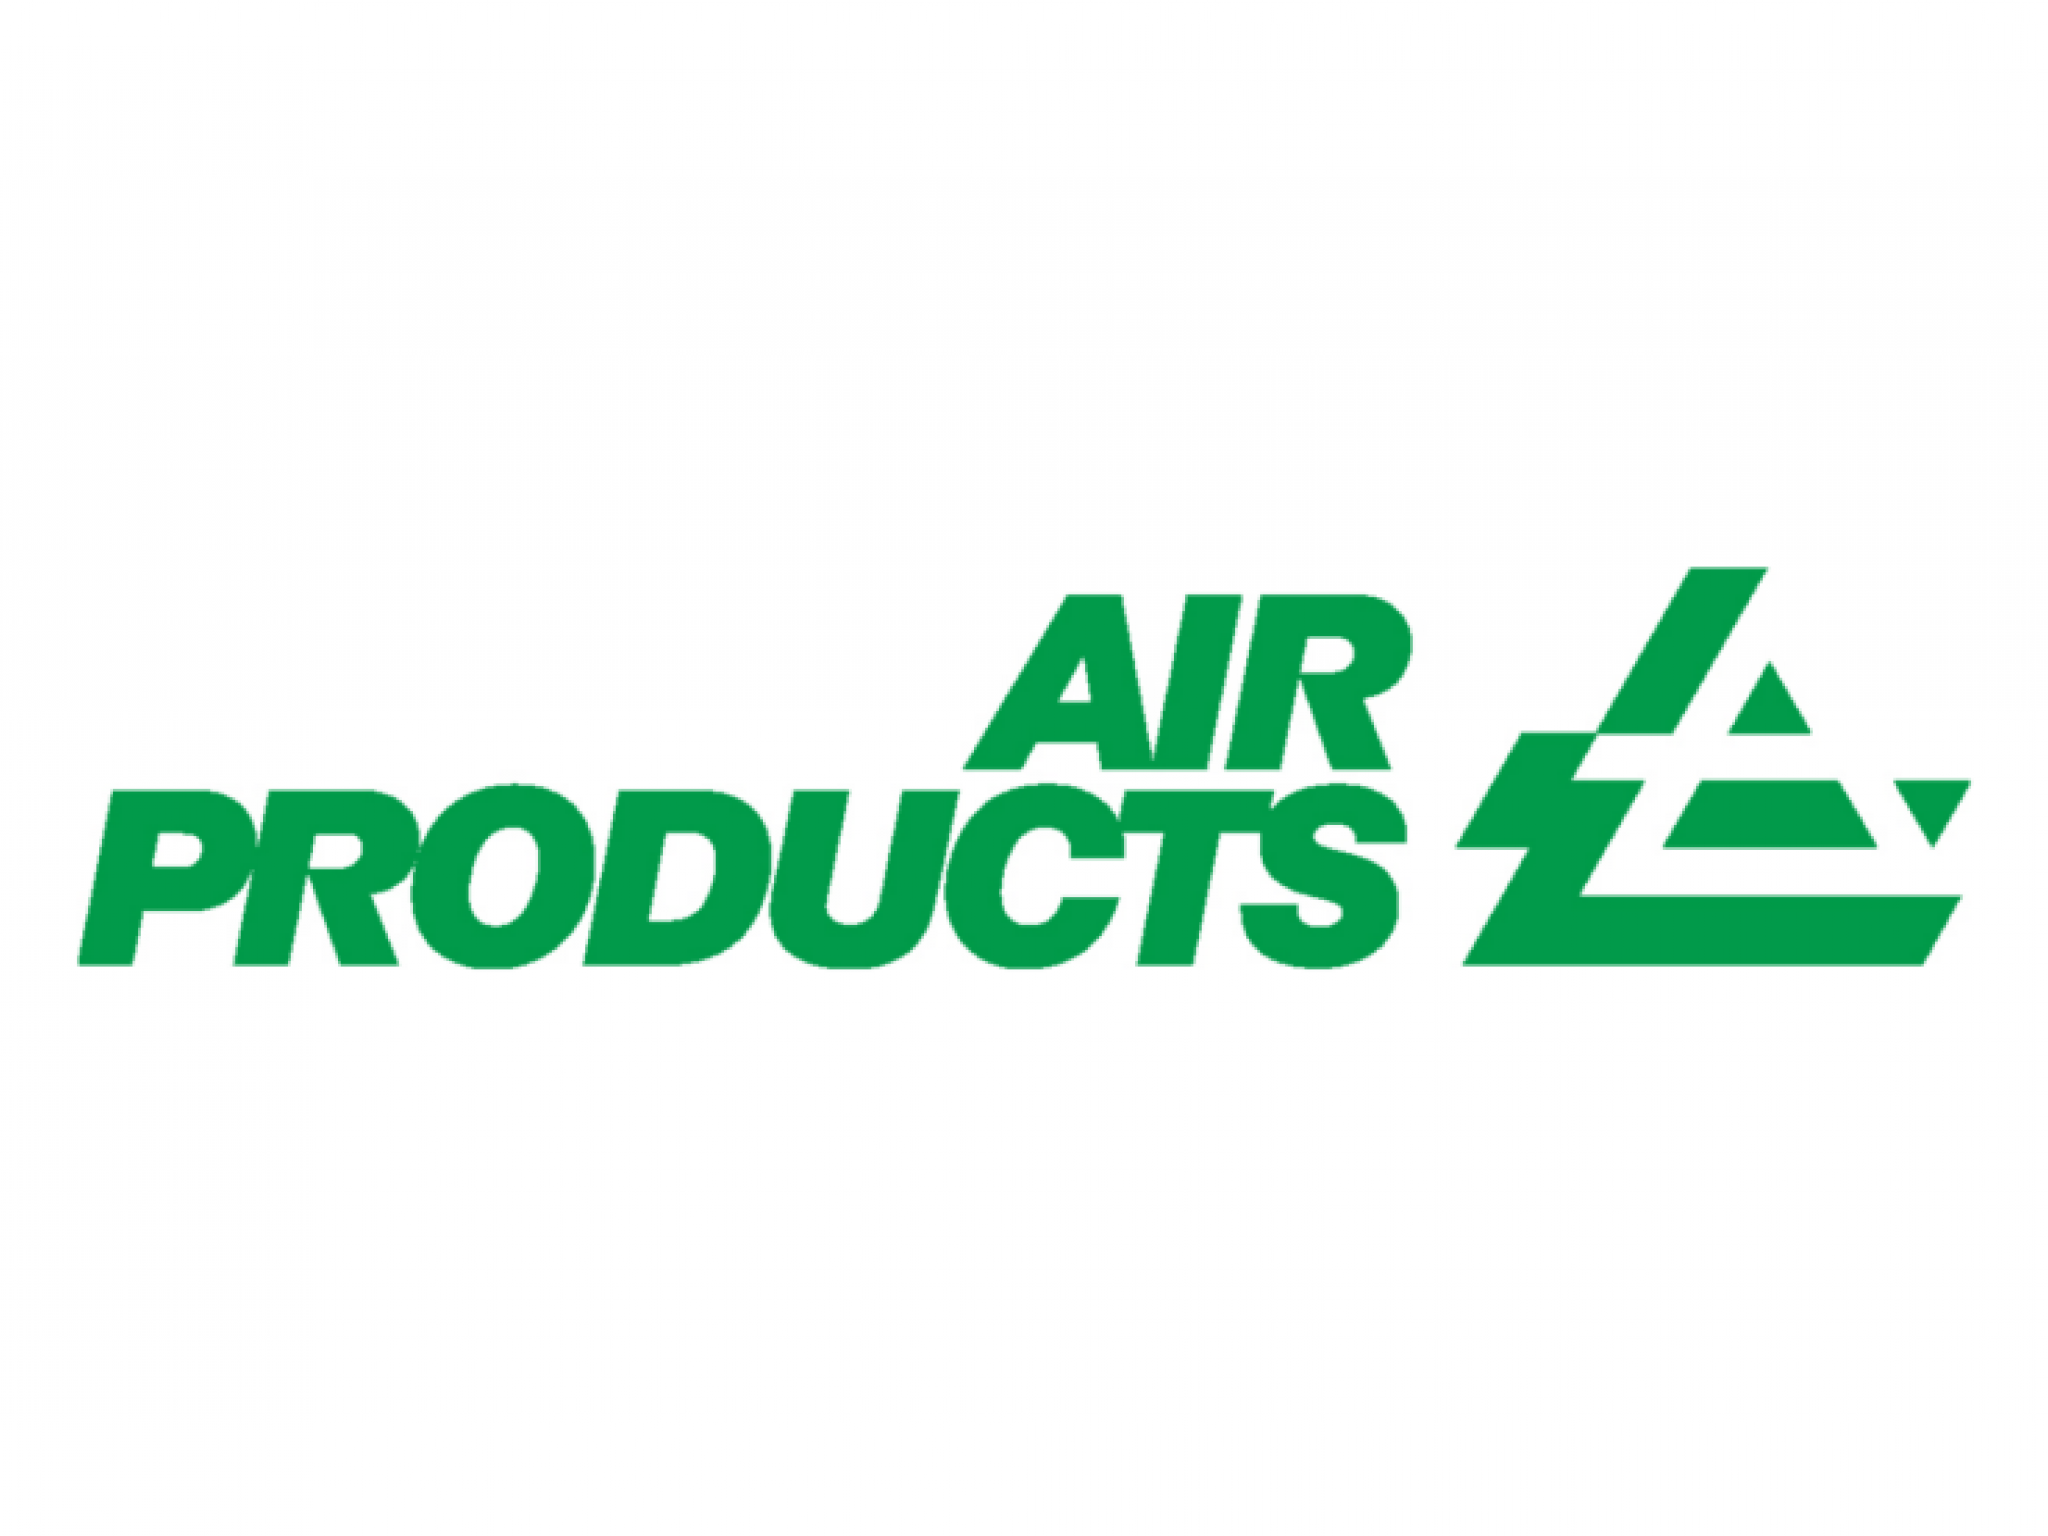  why-air-products--chemicals-shares-are-rising-today 